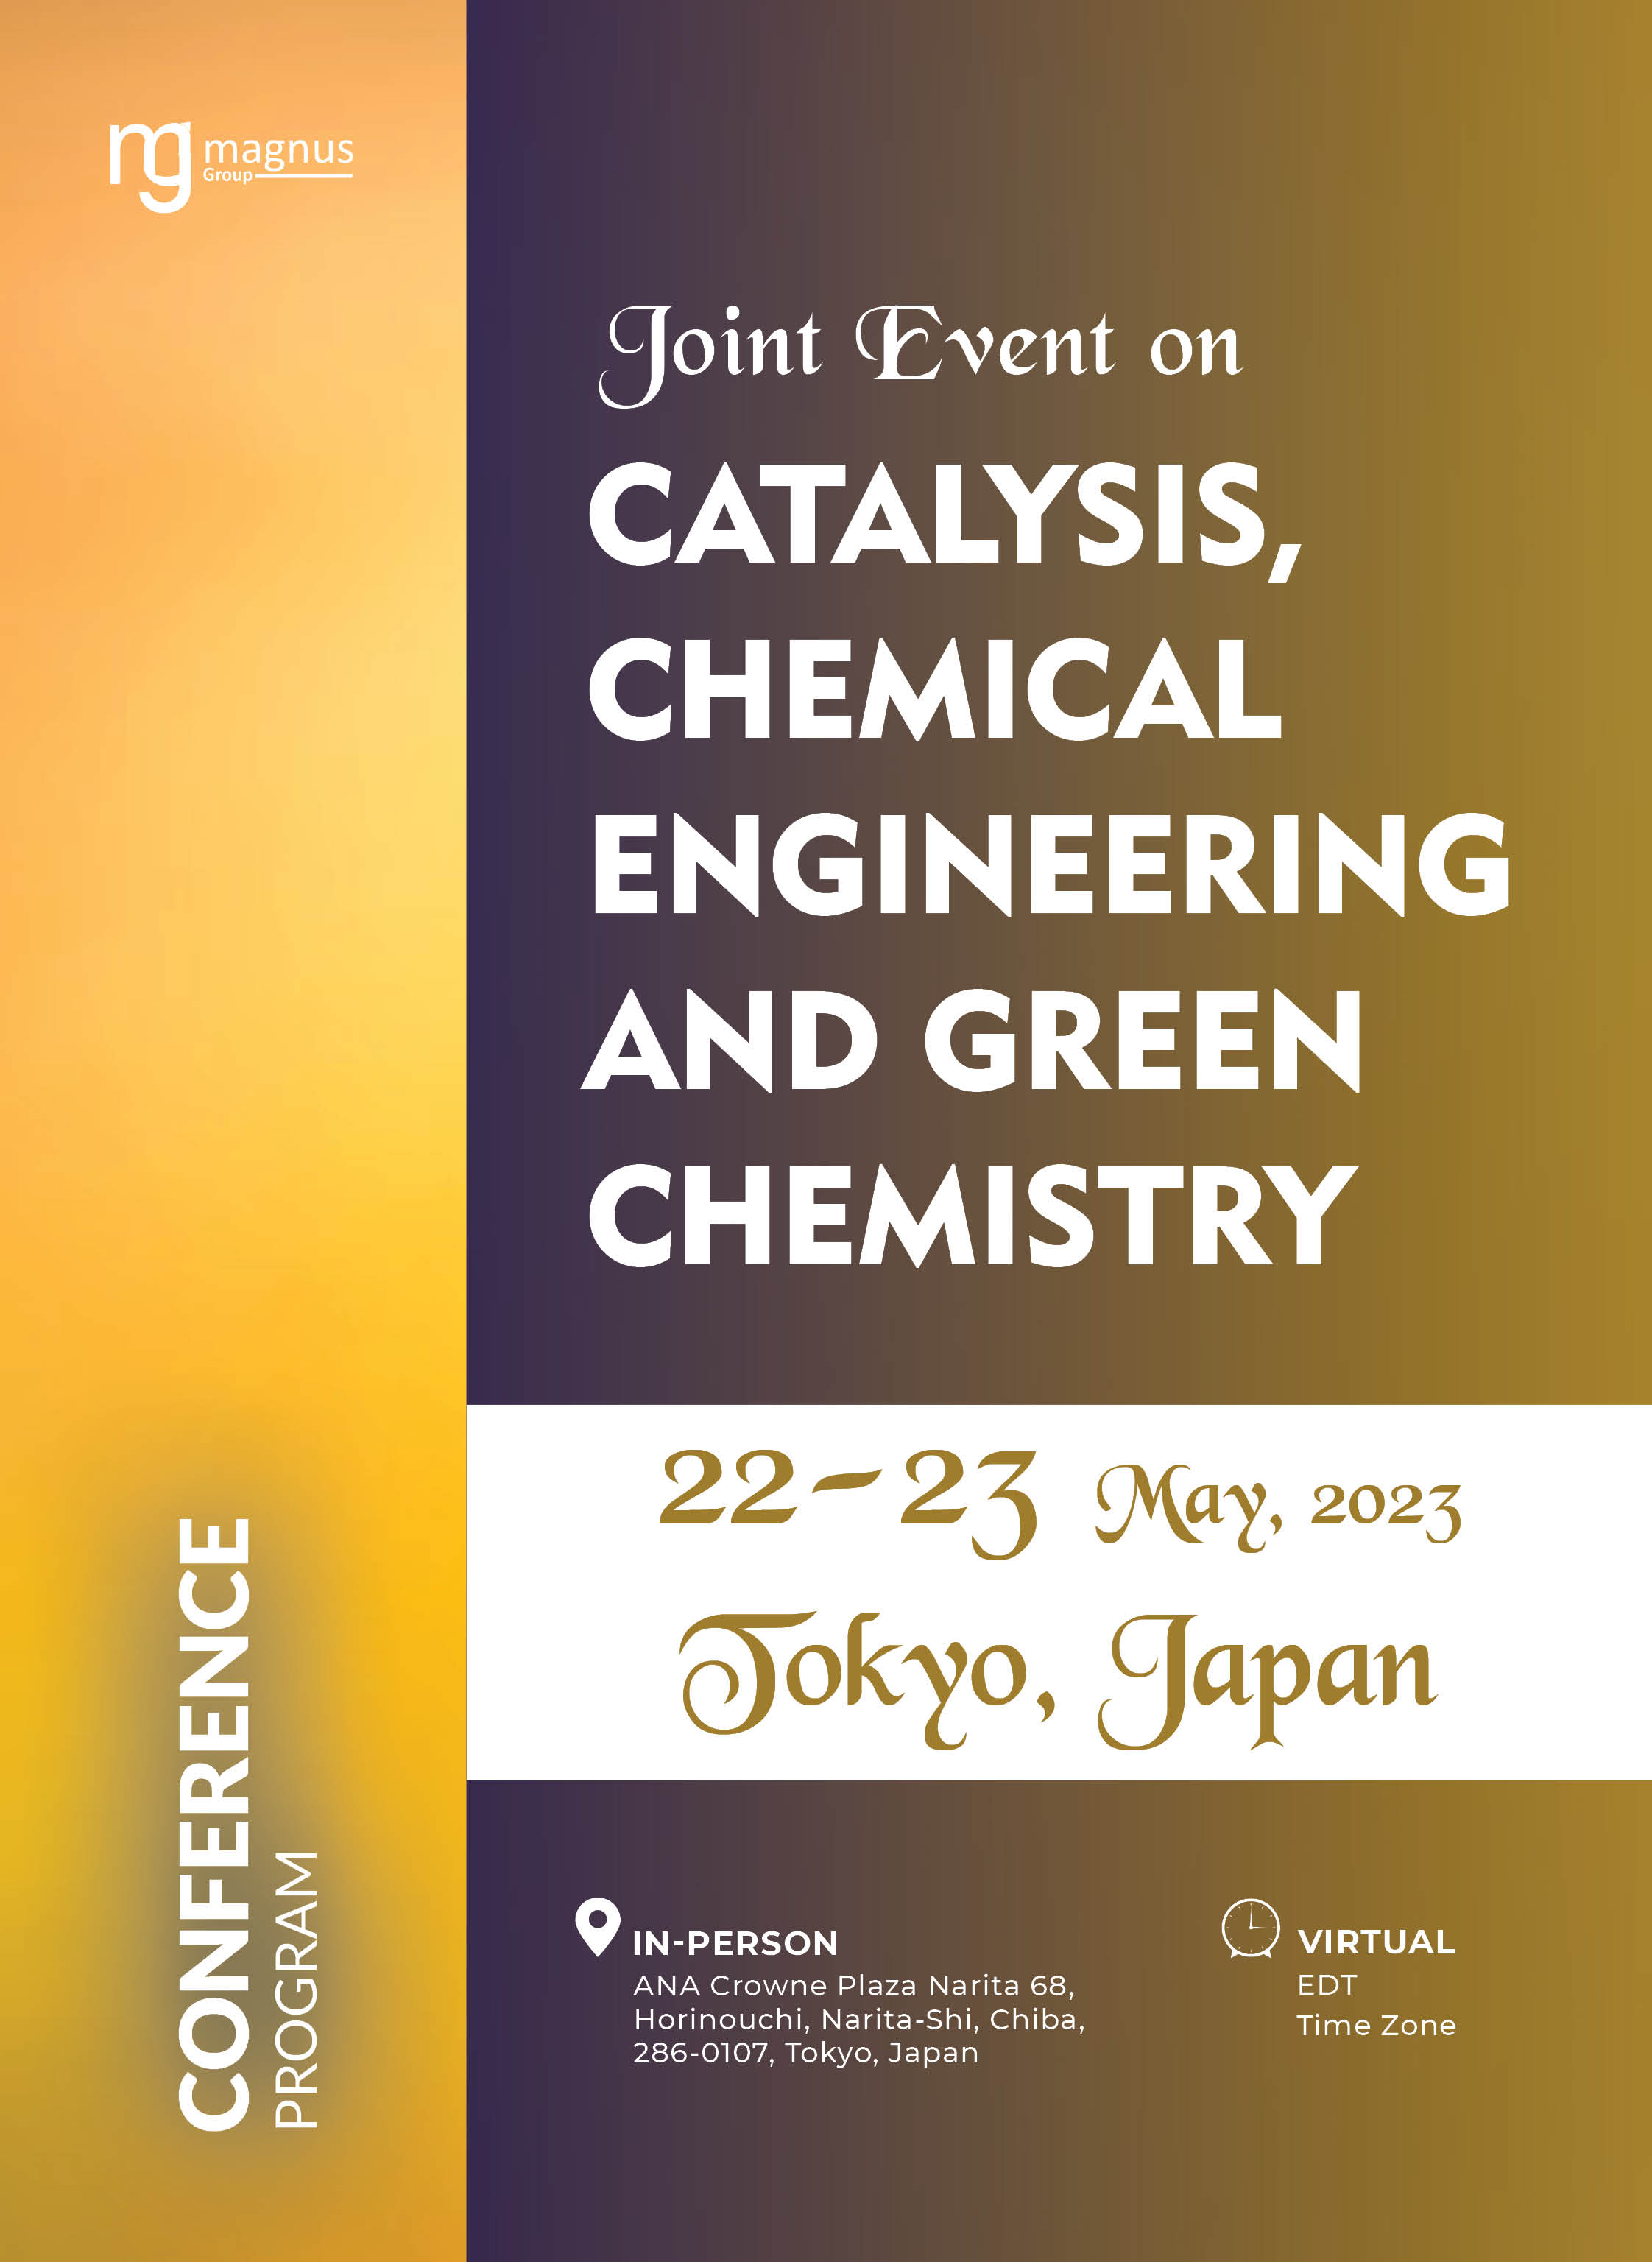 3rd Edition of International Conference on Green Chemistry and Renewable Energy | Tokyo, Japan Program